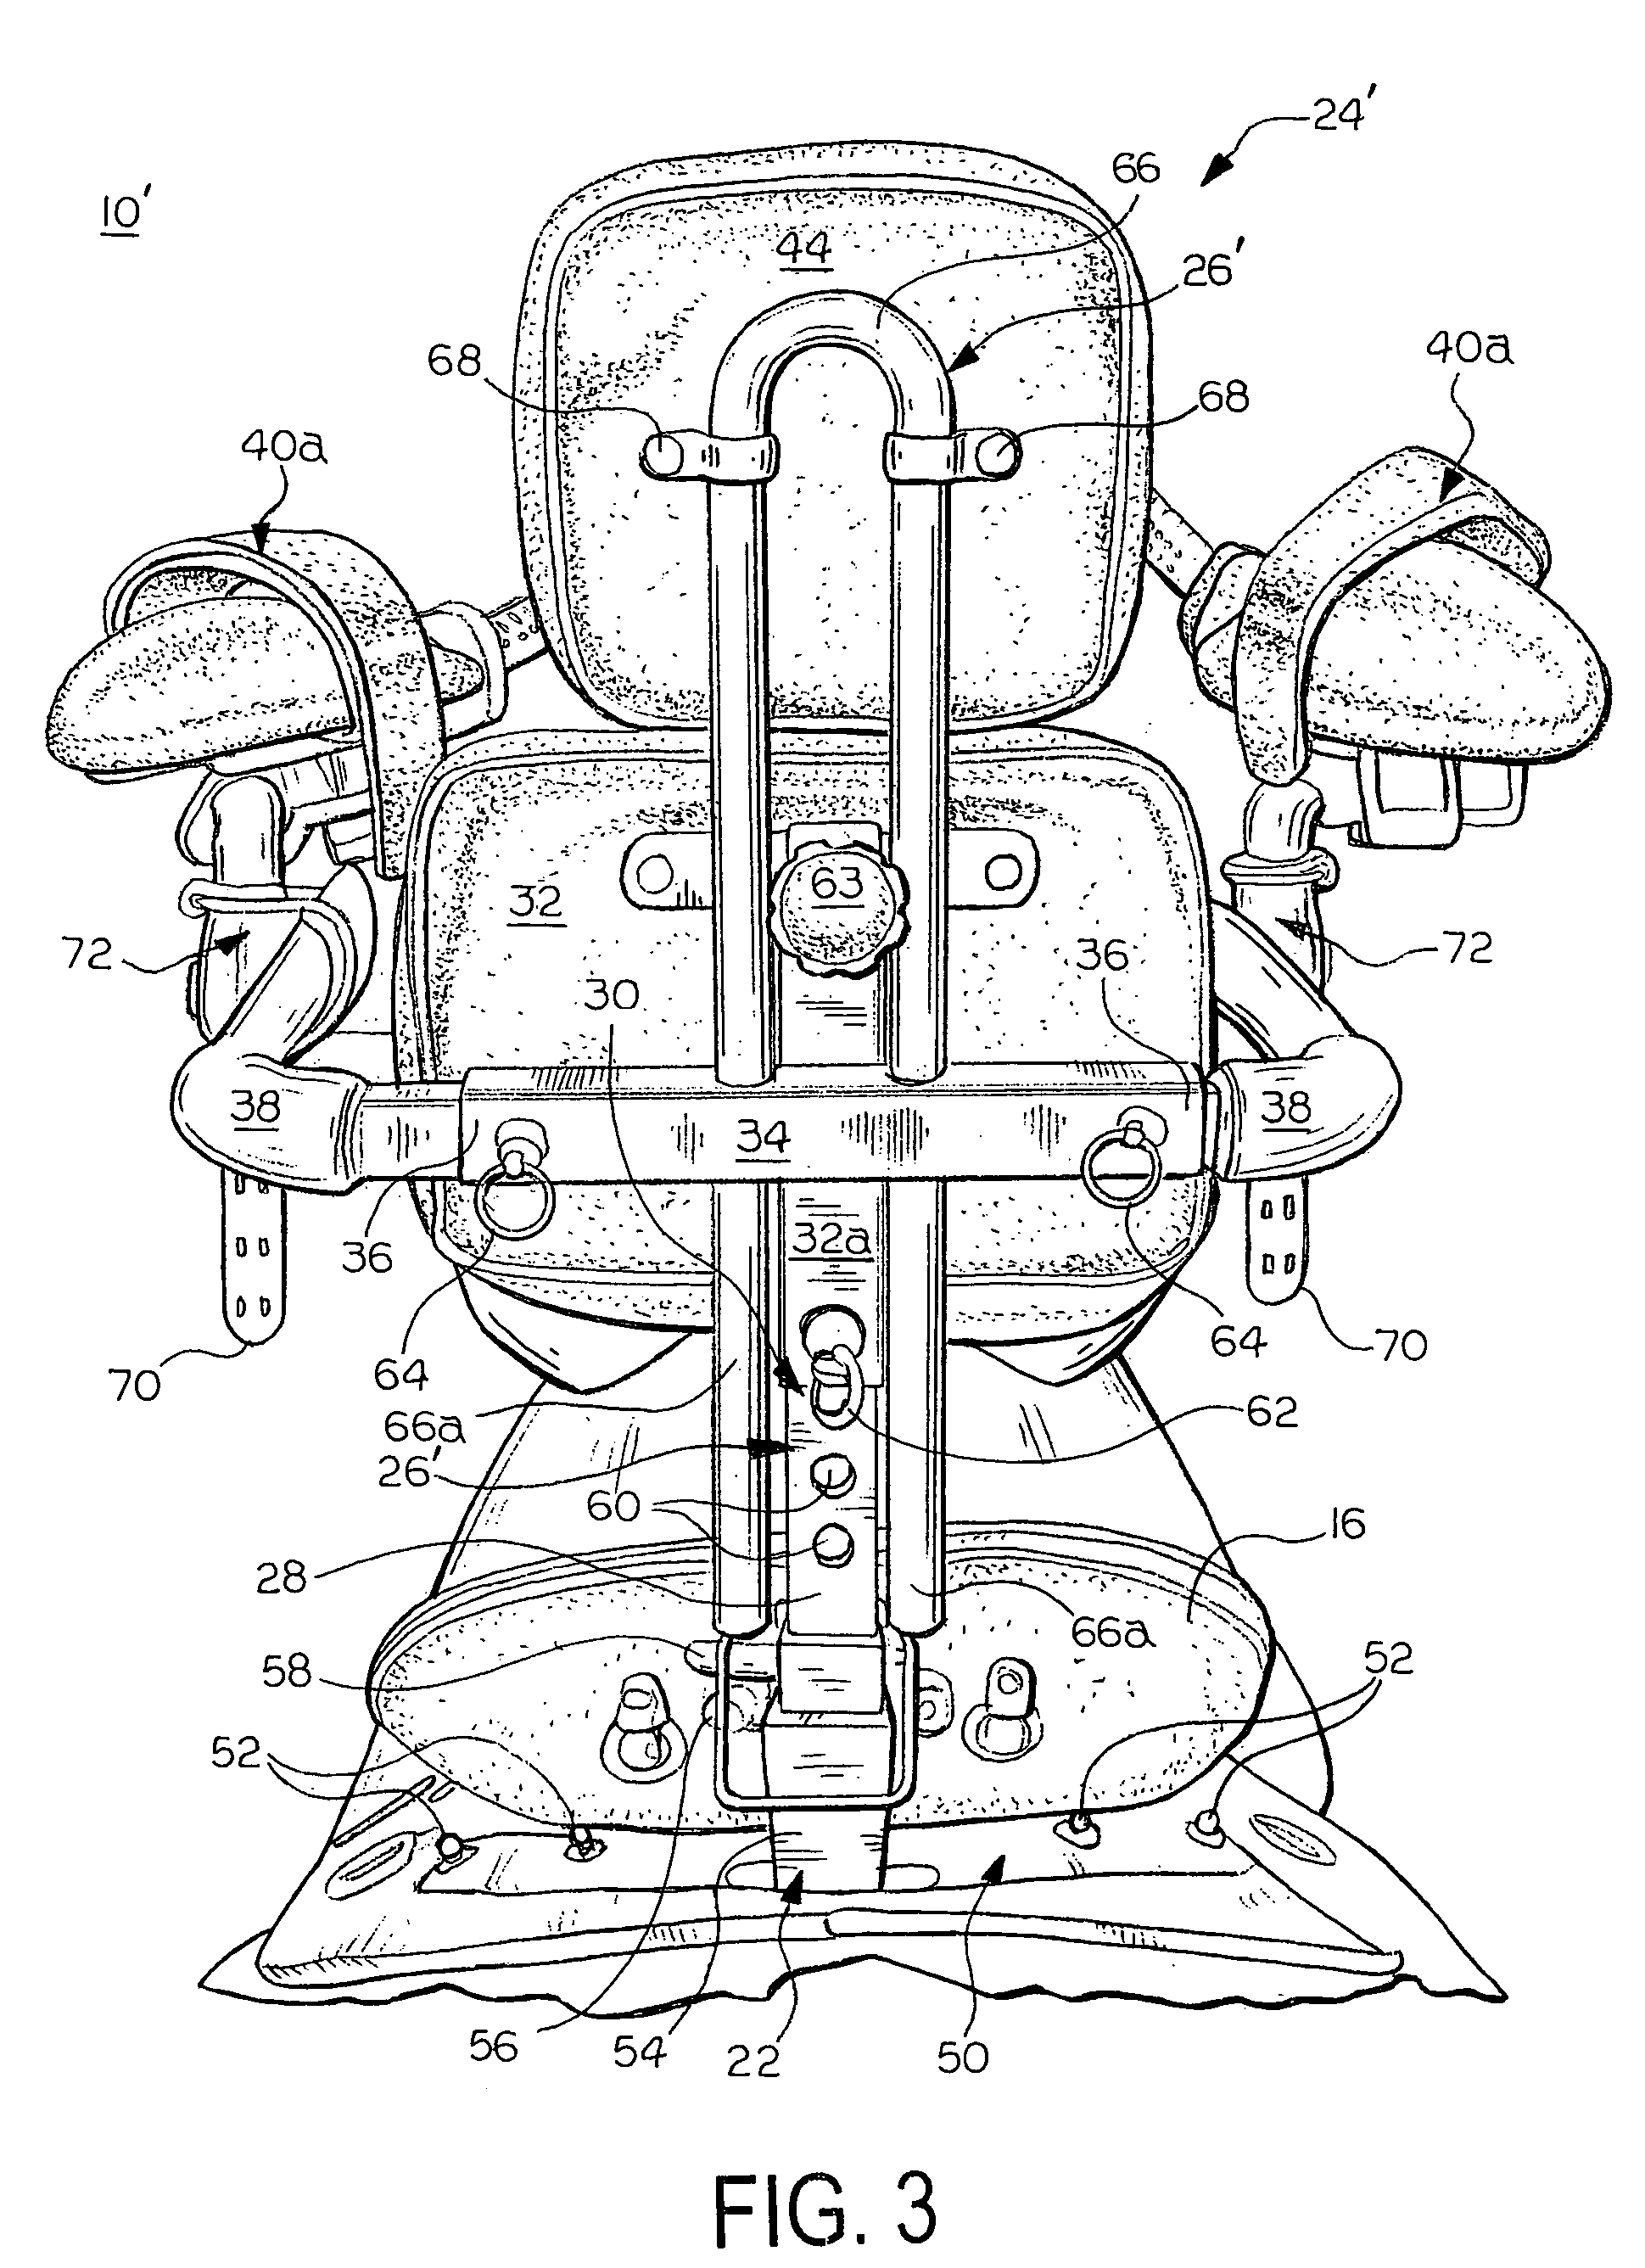 Adaptive saddle with support assembly